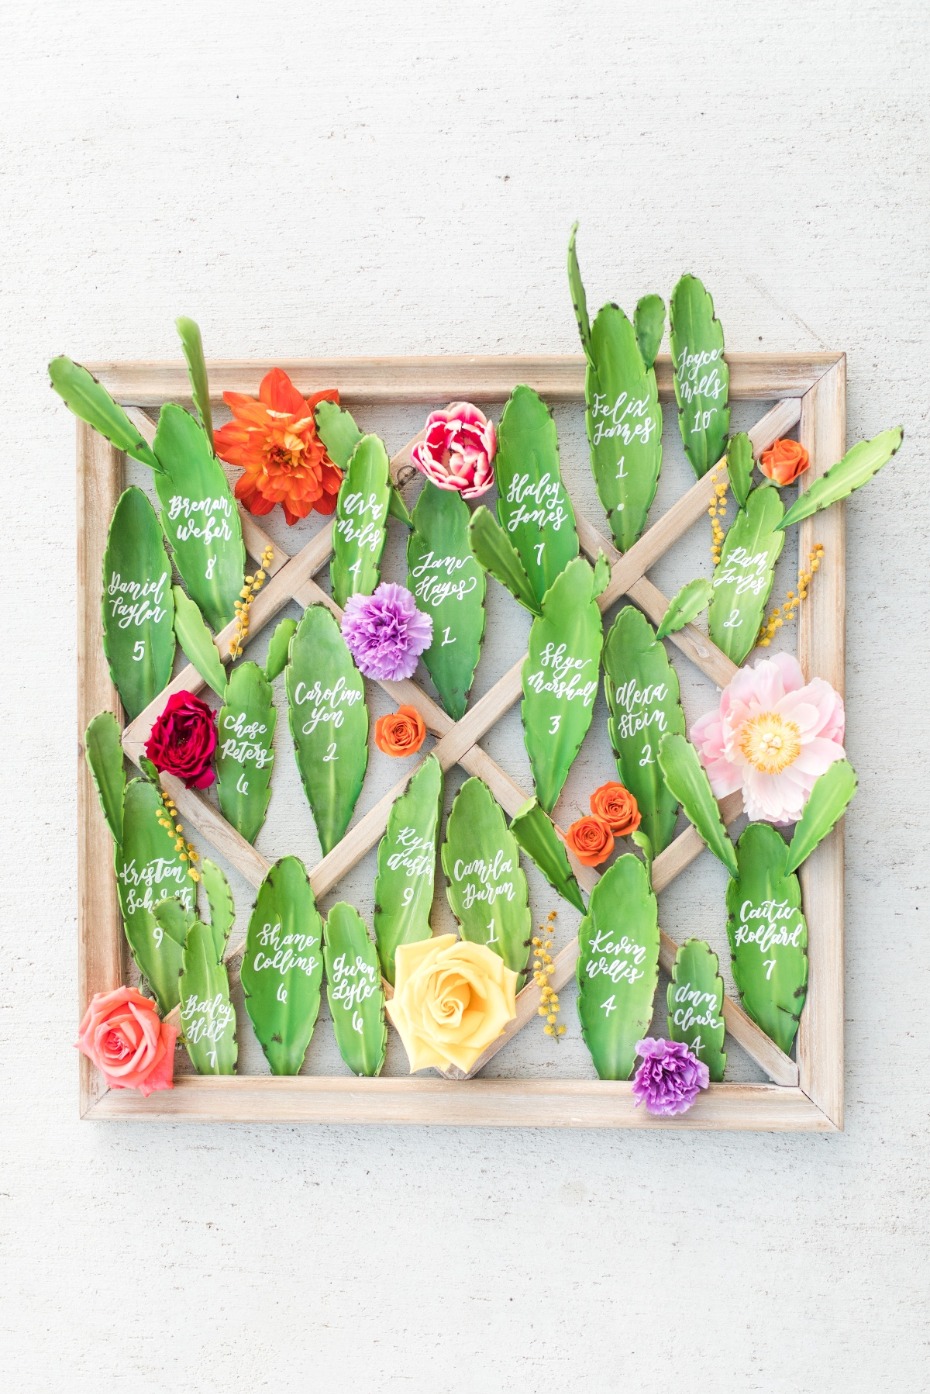 6 Personalised Wedding Favour Ideas That Your Guests Are Sure to Love